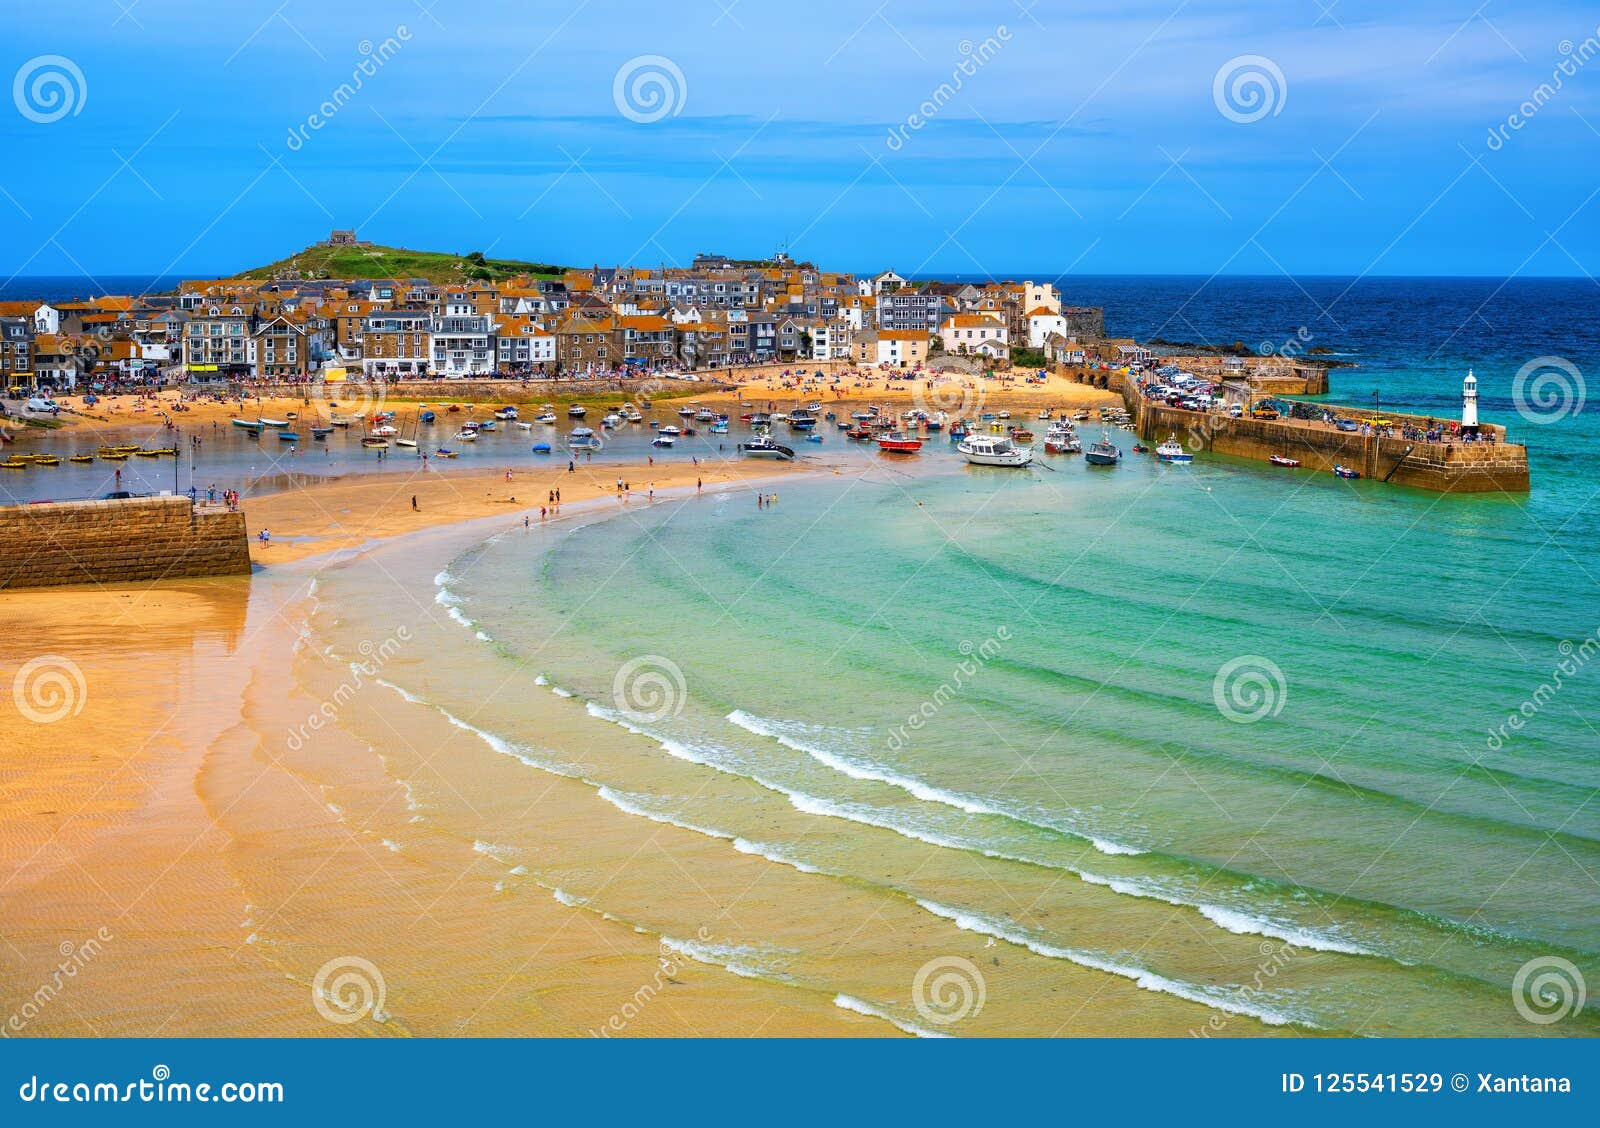 st ives, a popular seaside town and port in cornwall, england